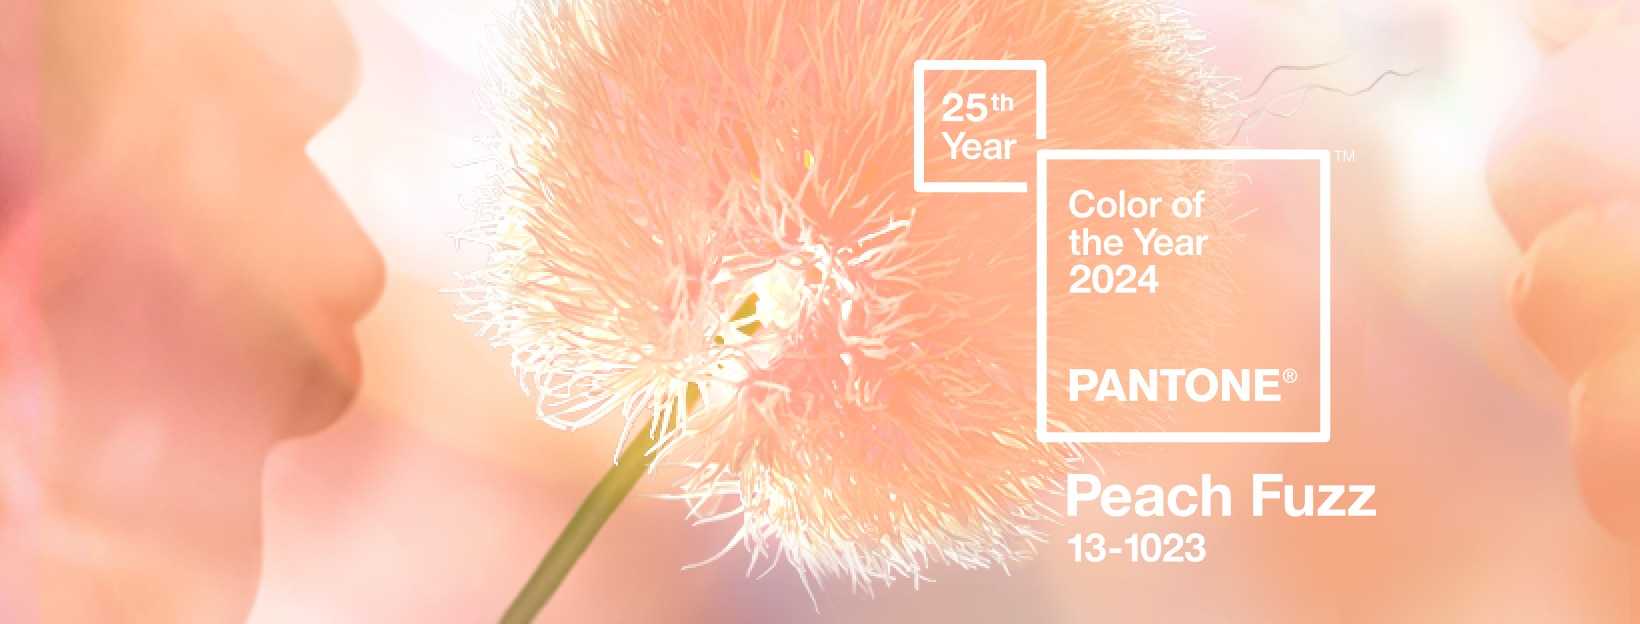 Peach Fuzz is Pantone's Color of the Year 2024!